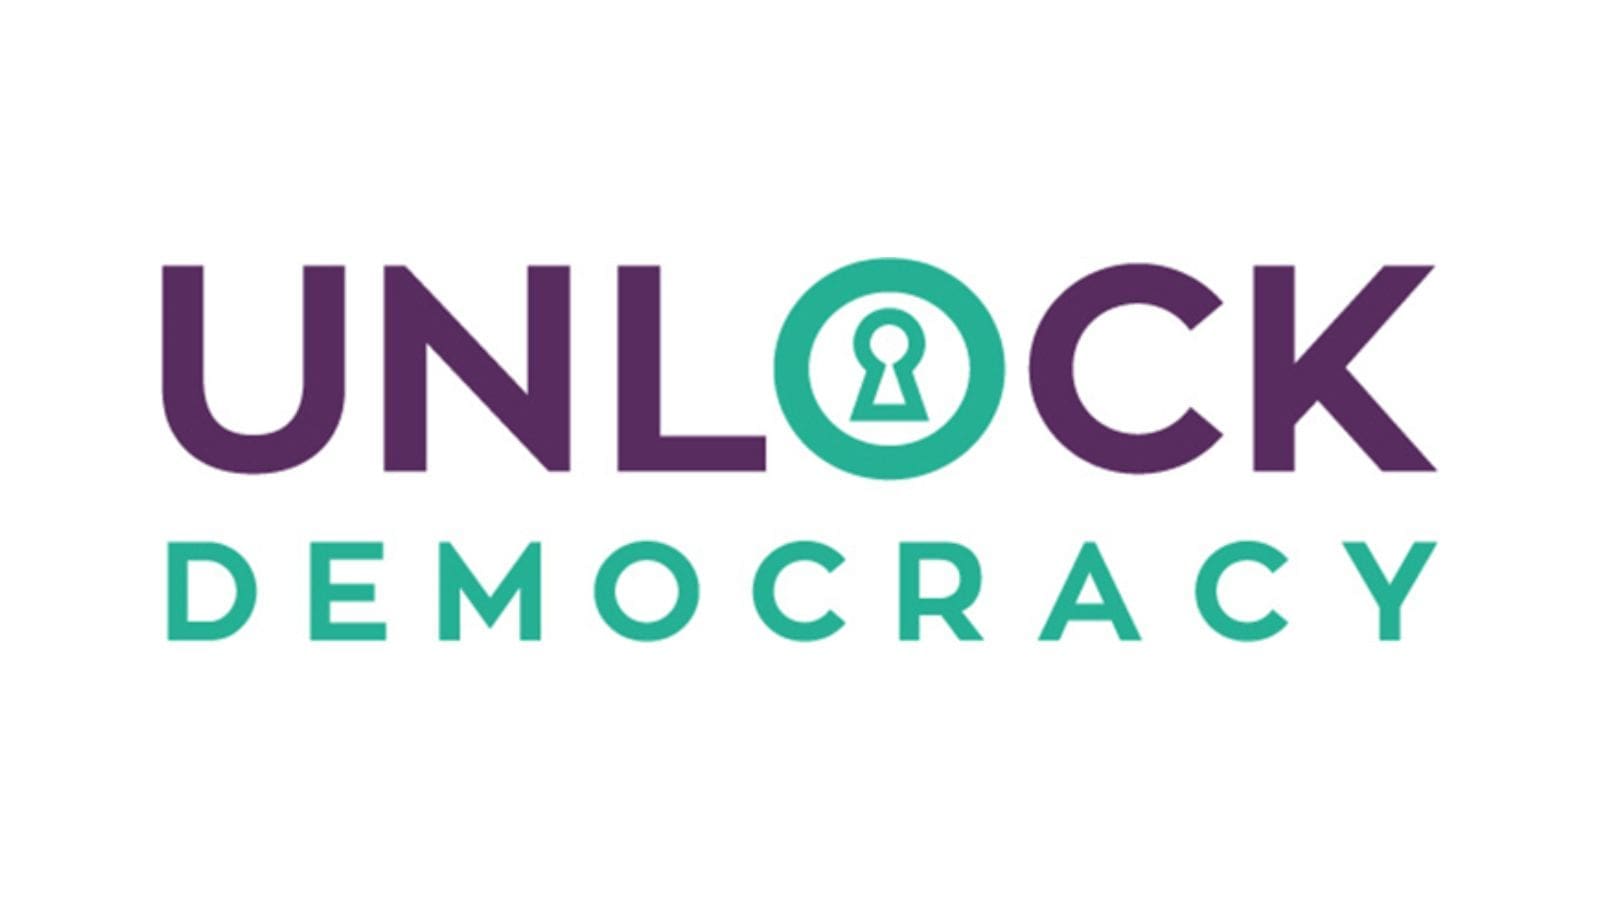 The word "UNLOCK" in purple apart from the "O" which is in turquoise. Under this is the word "Democracy" in turquoise.